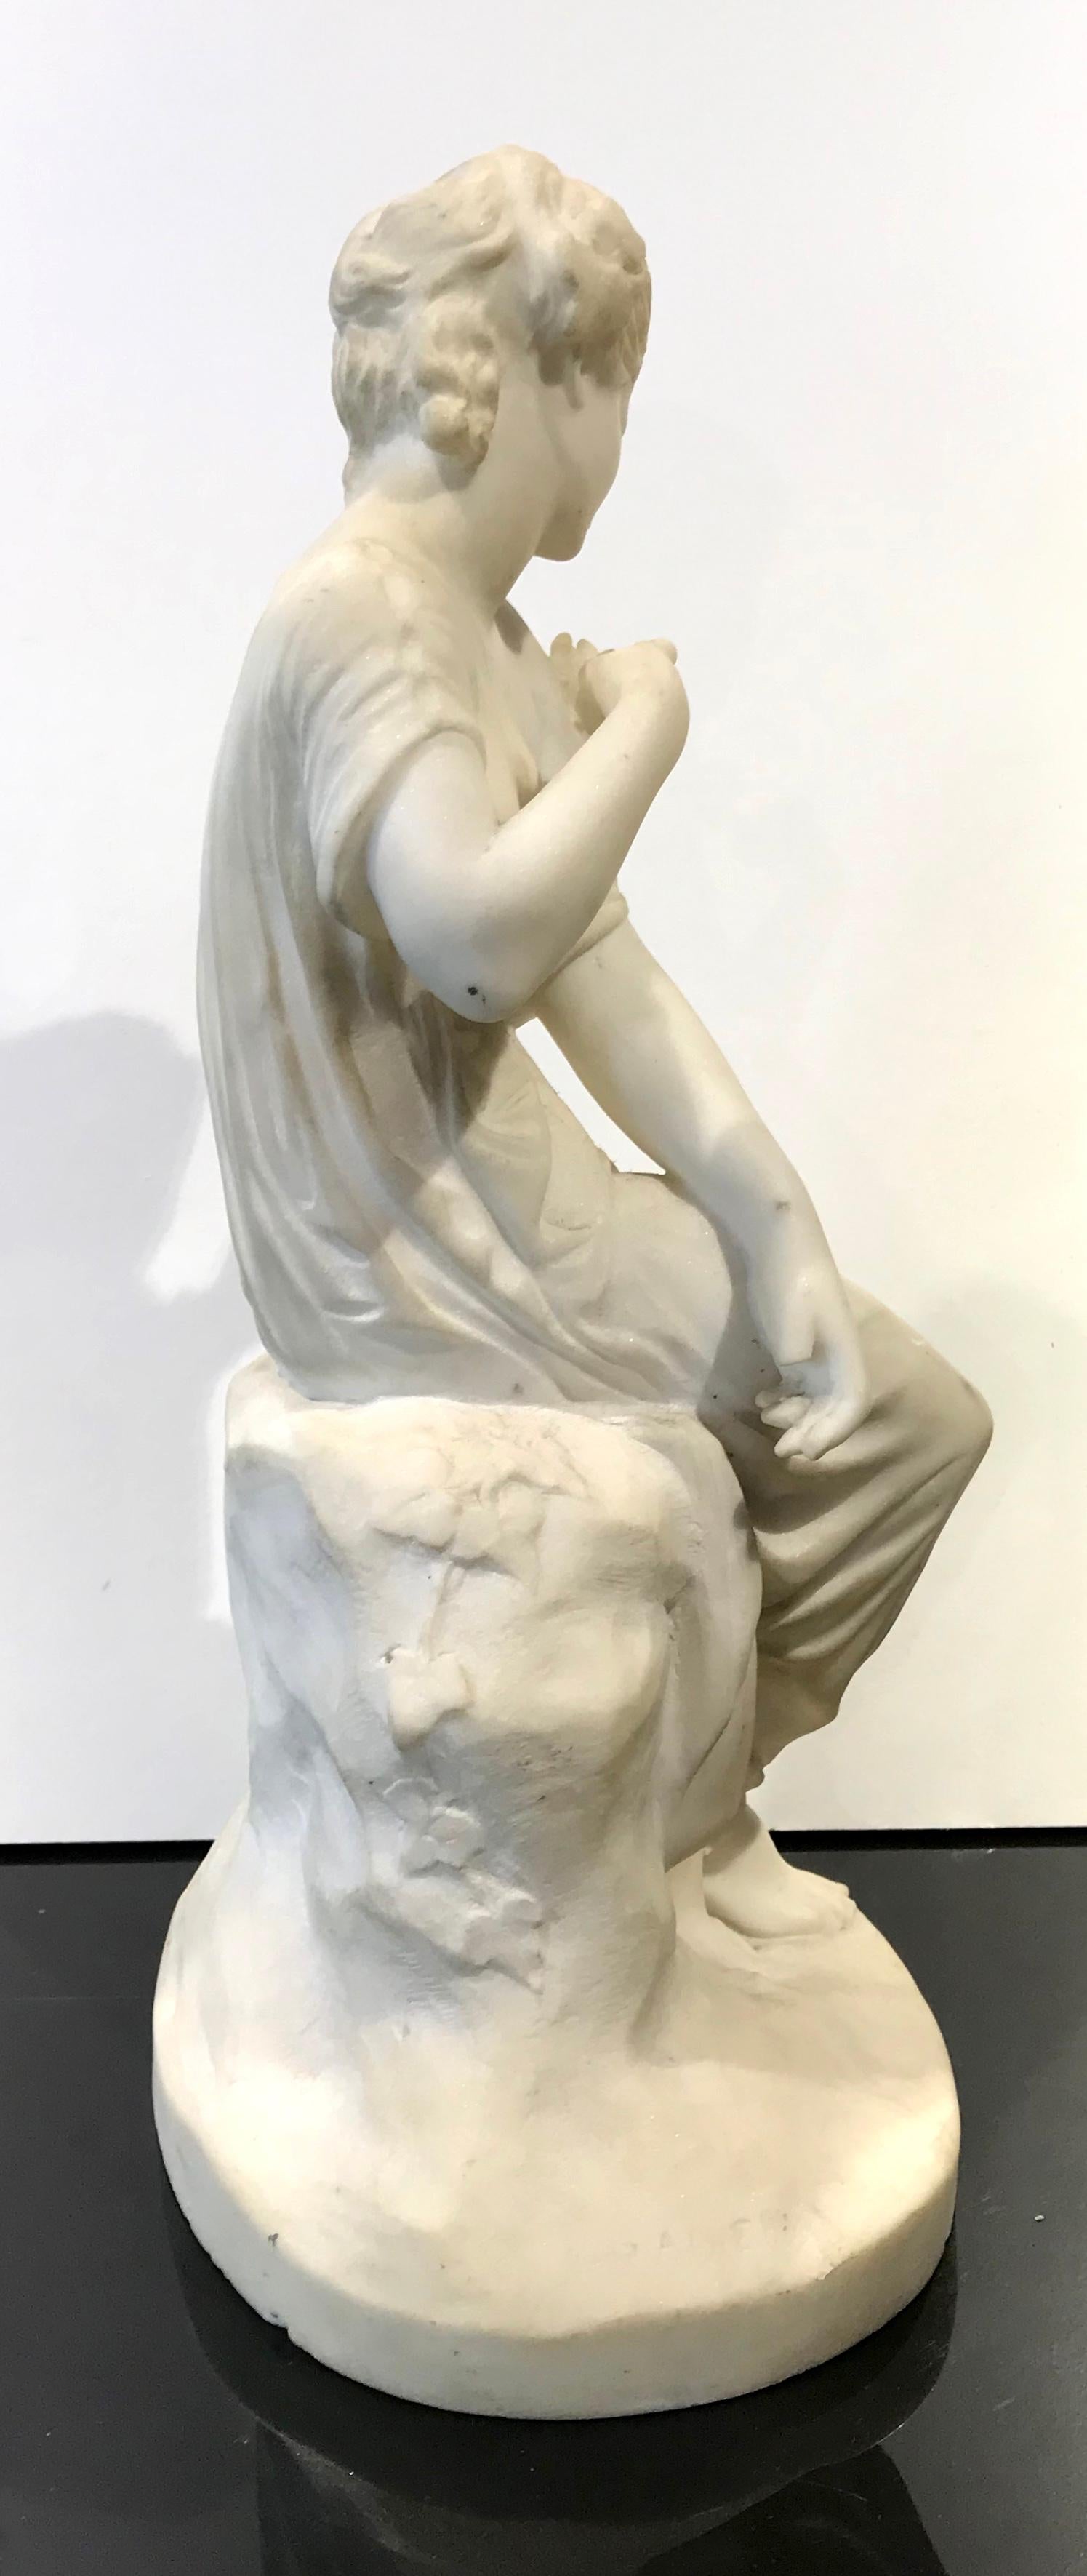 Statuary Marble 19th Century French Marble Sculpture of Psyche by James Pradier Signed